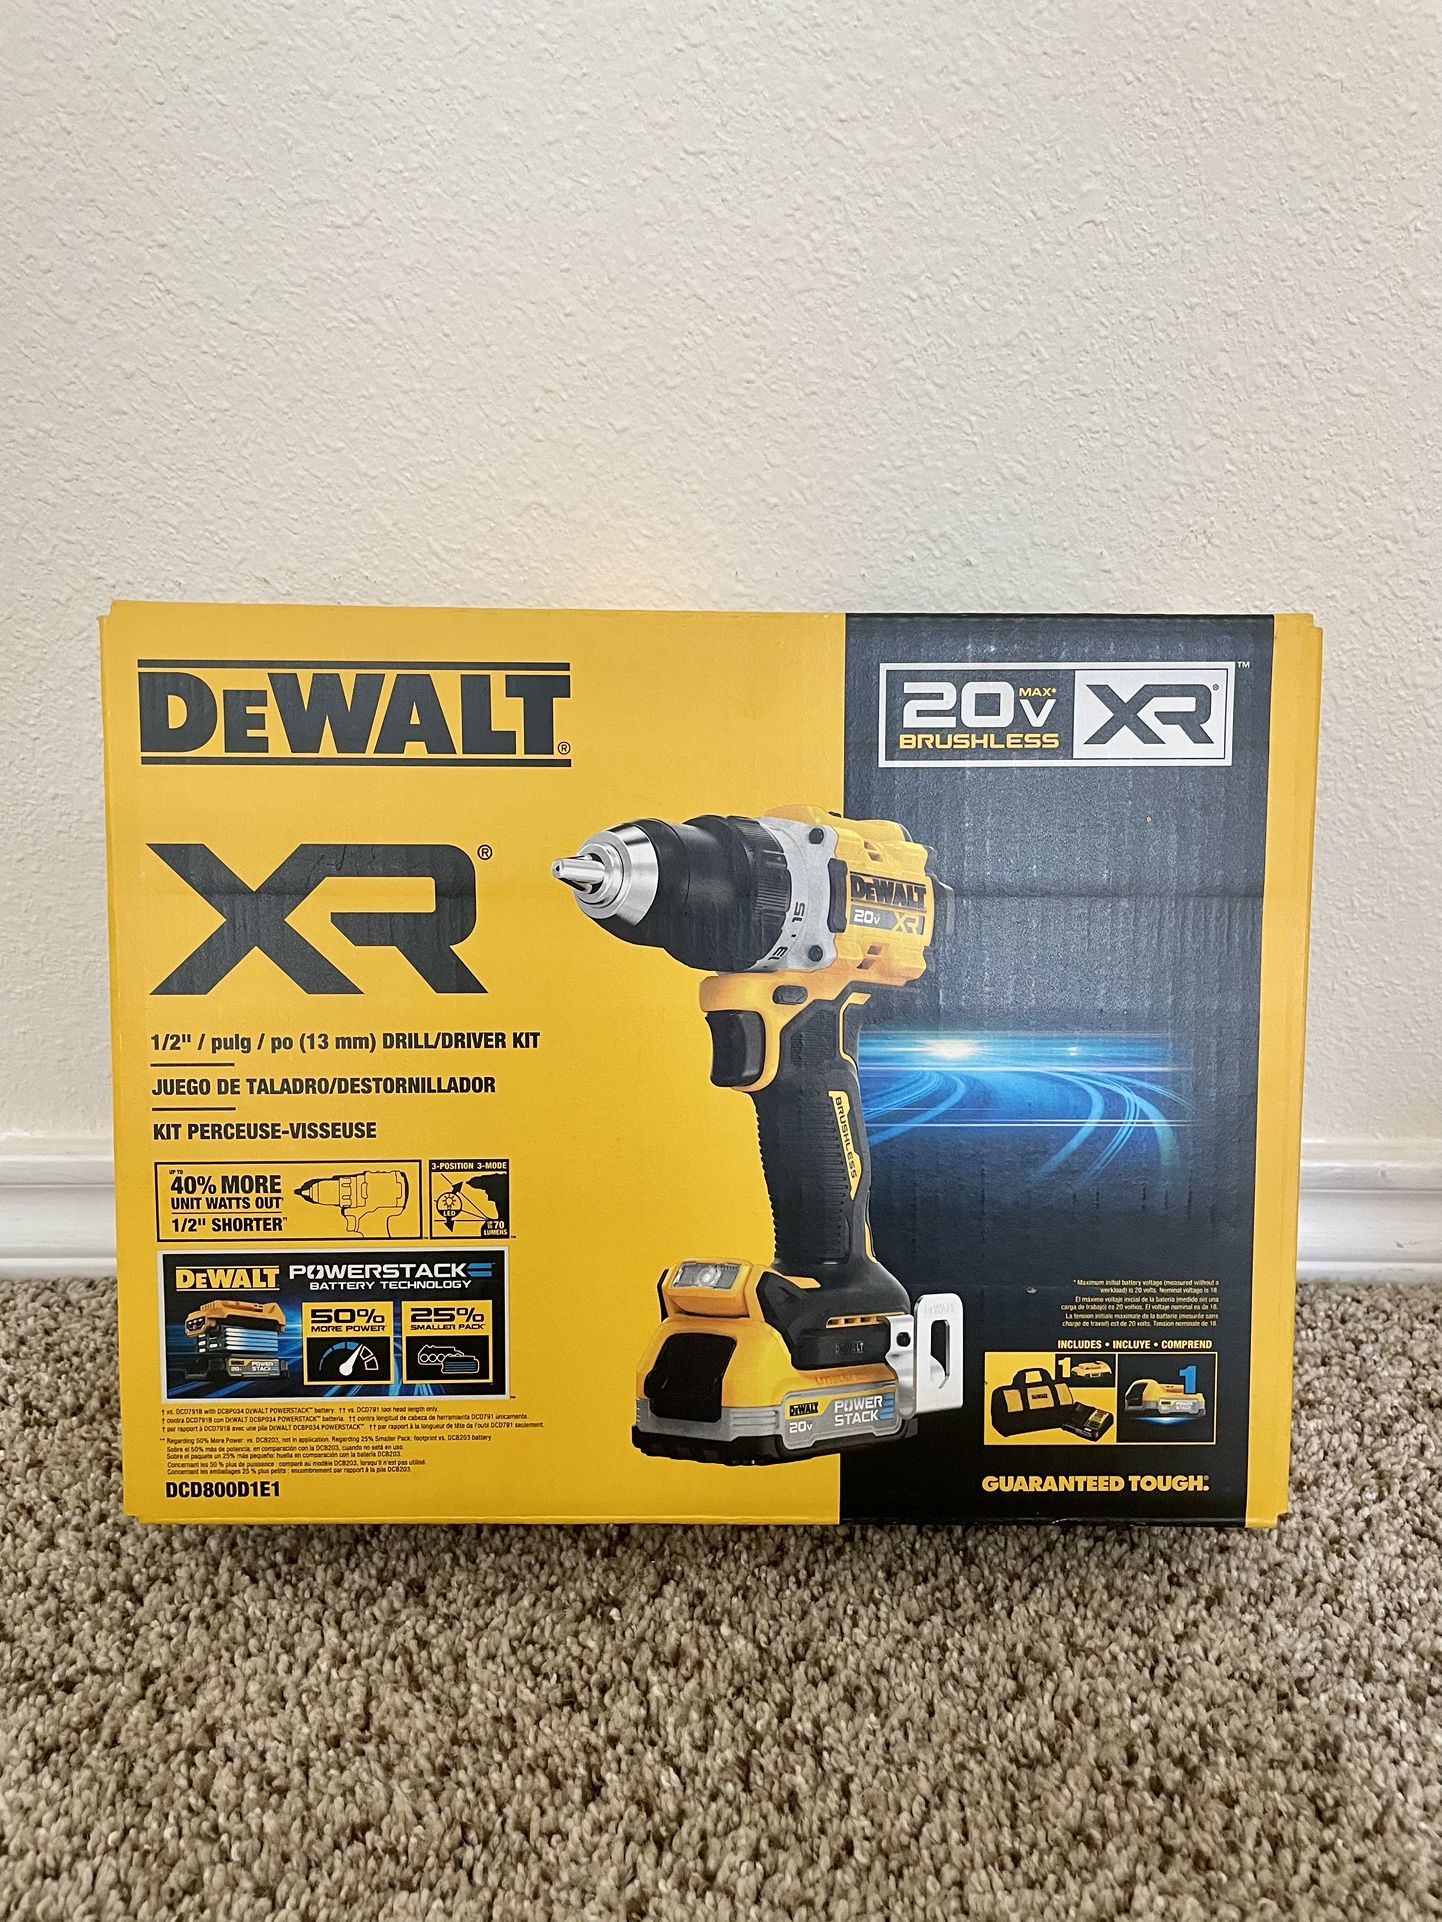 DEWALT XR 20-volt Max 1/2-in Keyless Brushless Cordless Drill (2-Batteries Included, Charger Included and Soft Bag included)